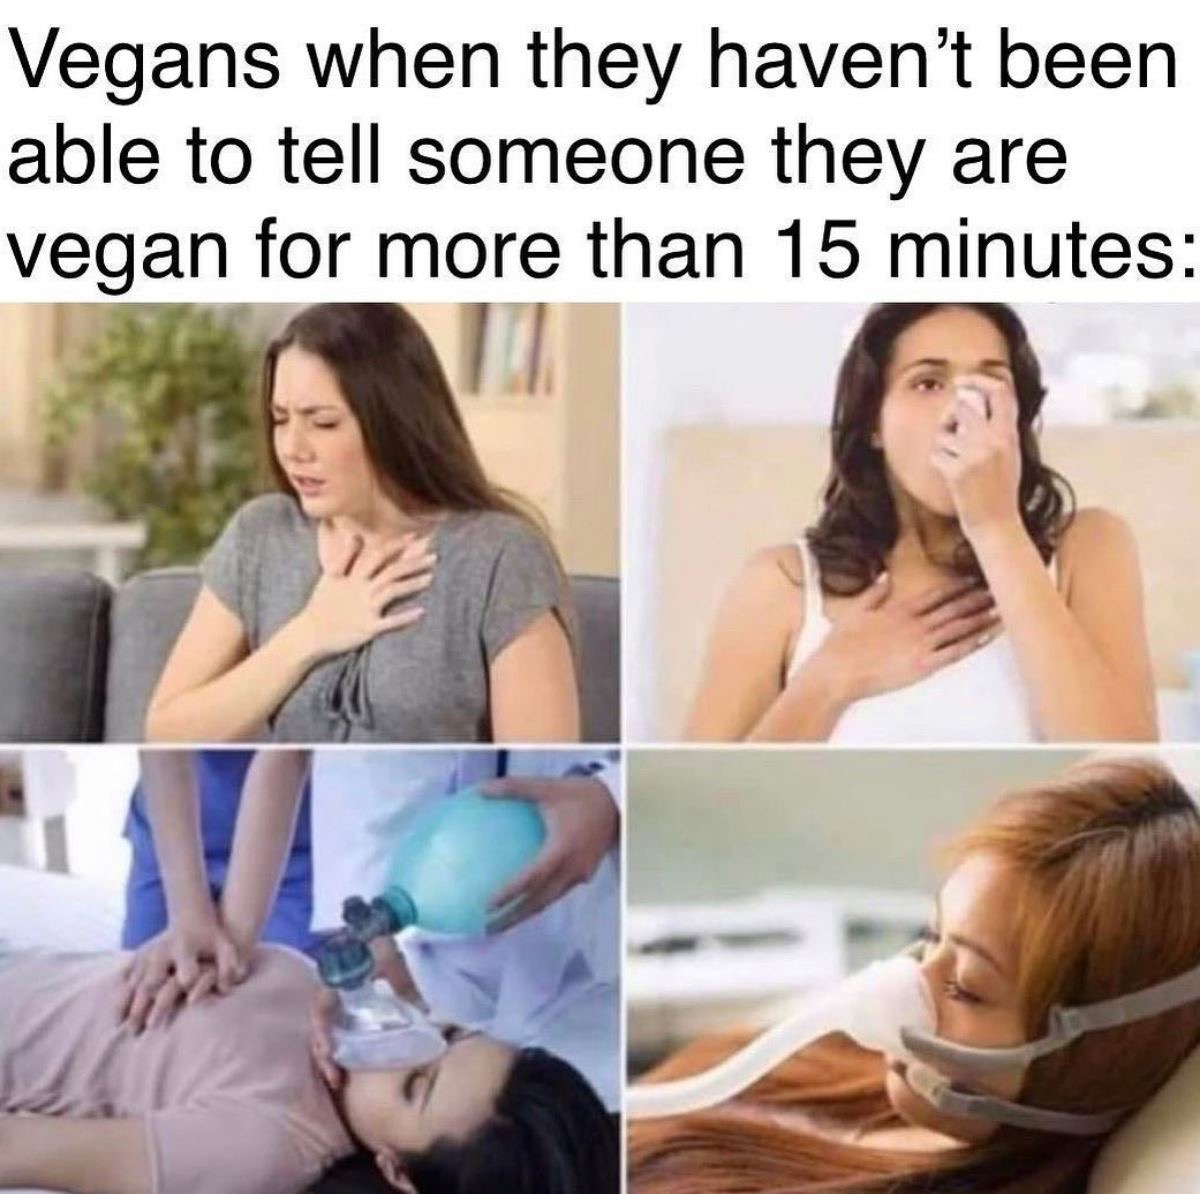 women have to admit they are wrong meme - Vegans when they haven't been able to tell someone they are vegan for more than 15 minutes